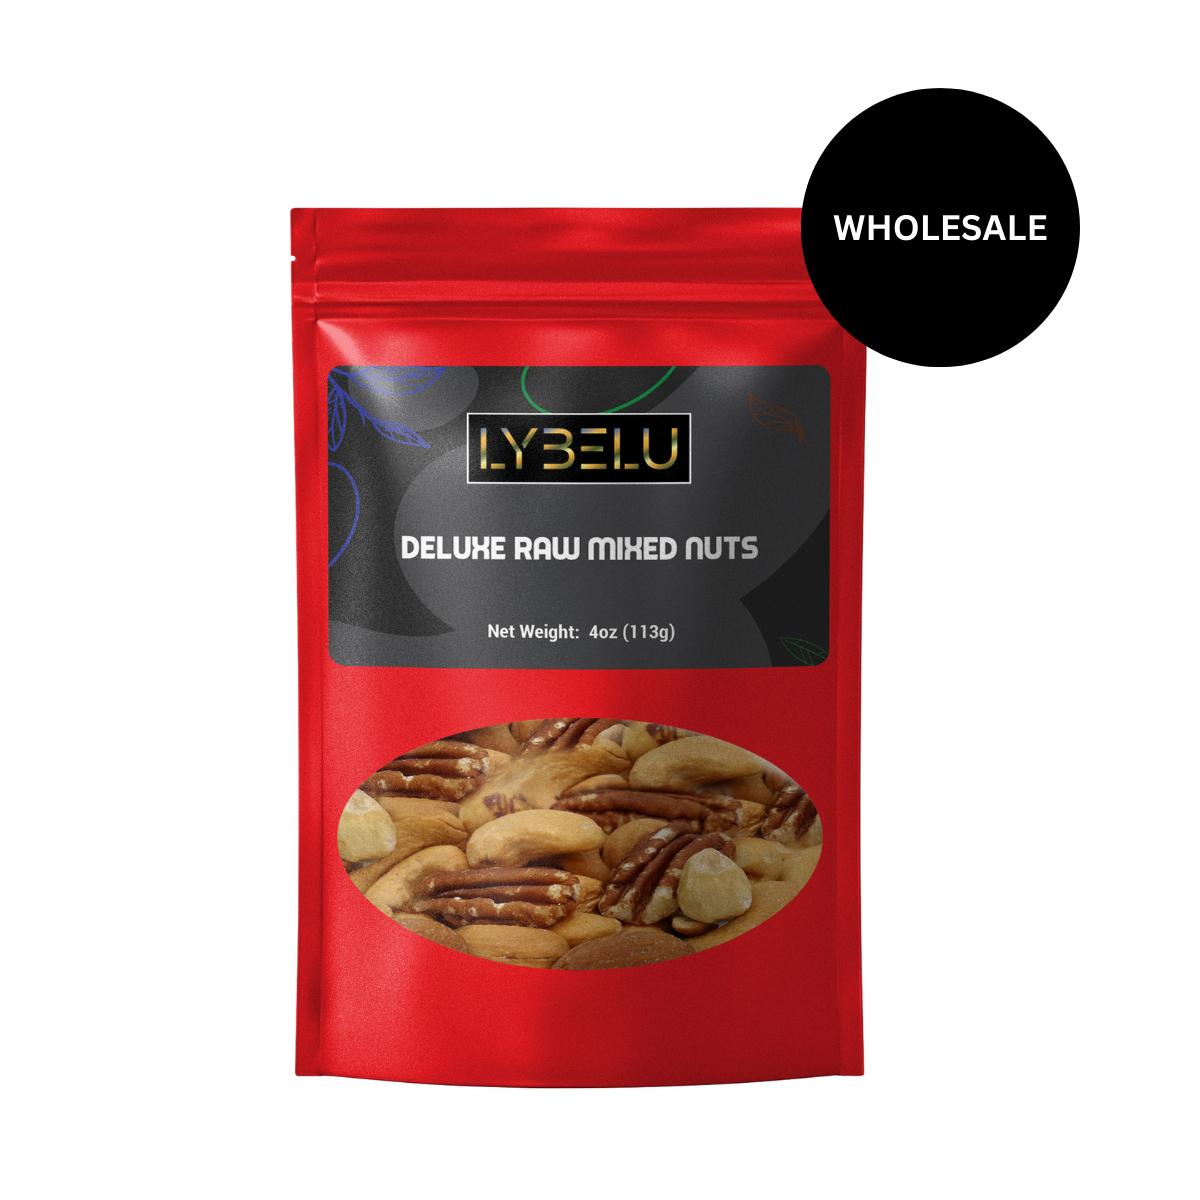 Deluxe Raw Mixed Nuts – 4oz